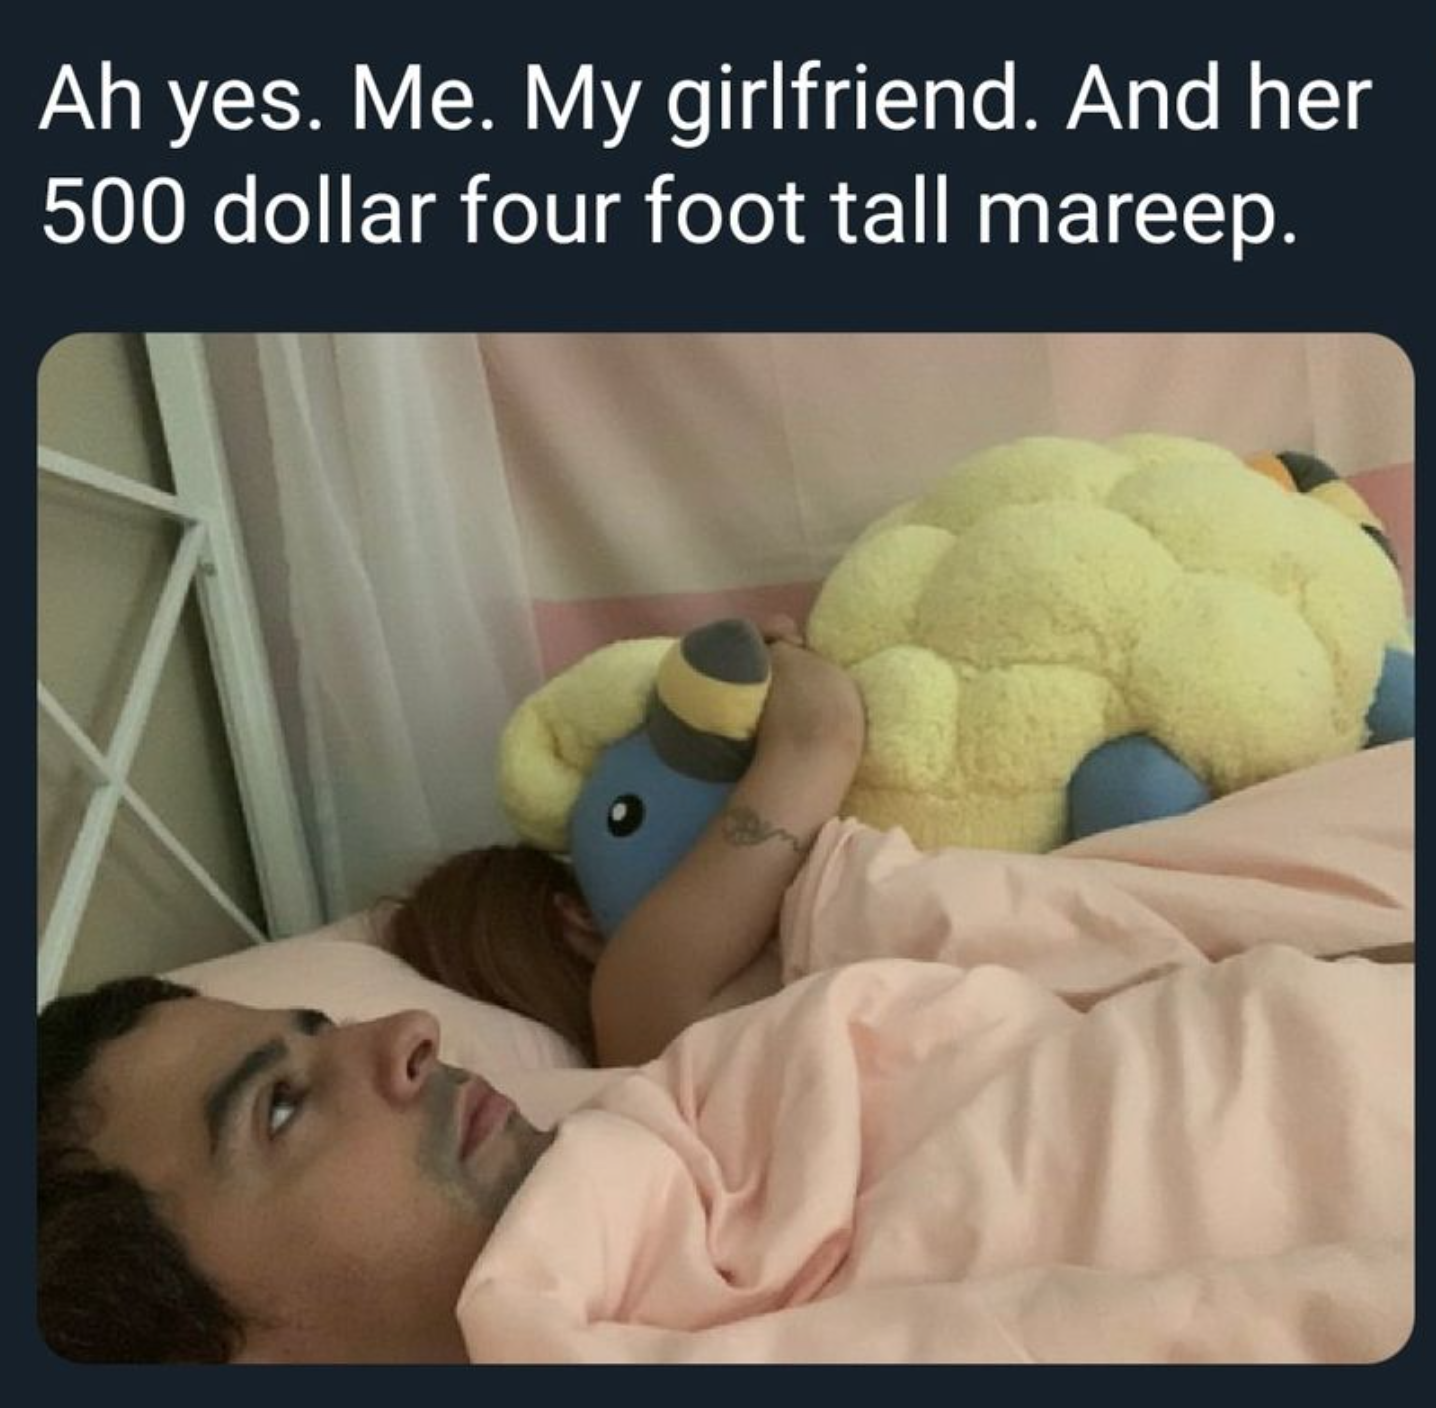 gaming memes - Ah yes. Me. My girlfriend. And her 500 dollar four foot tall mareep.